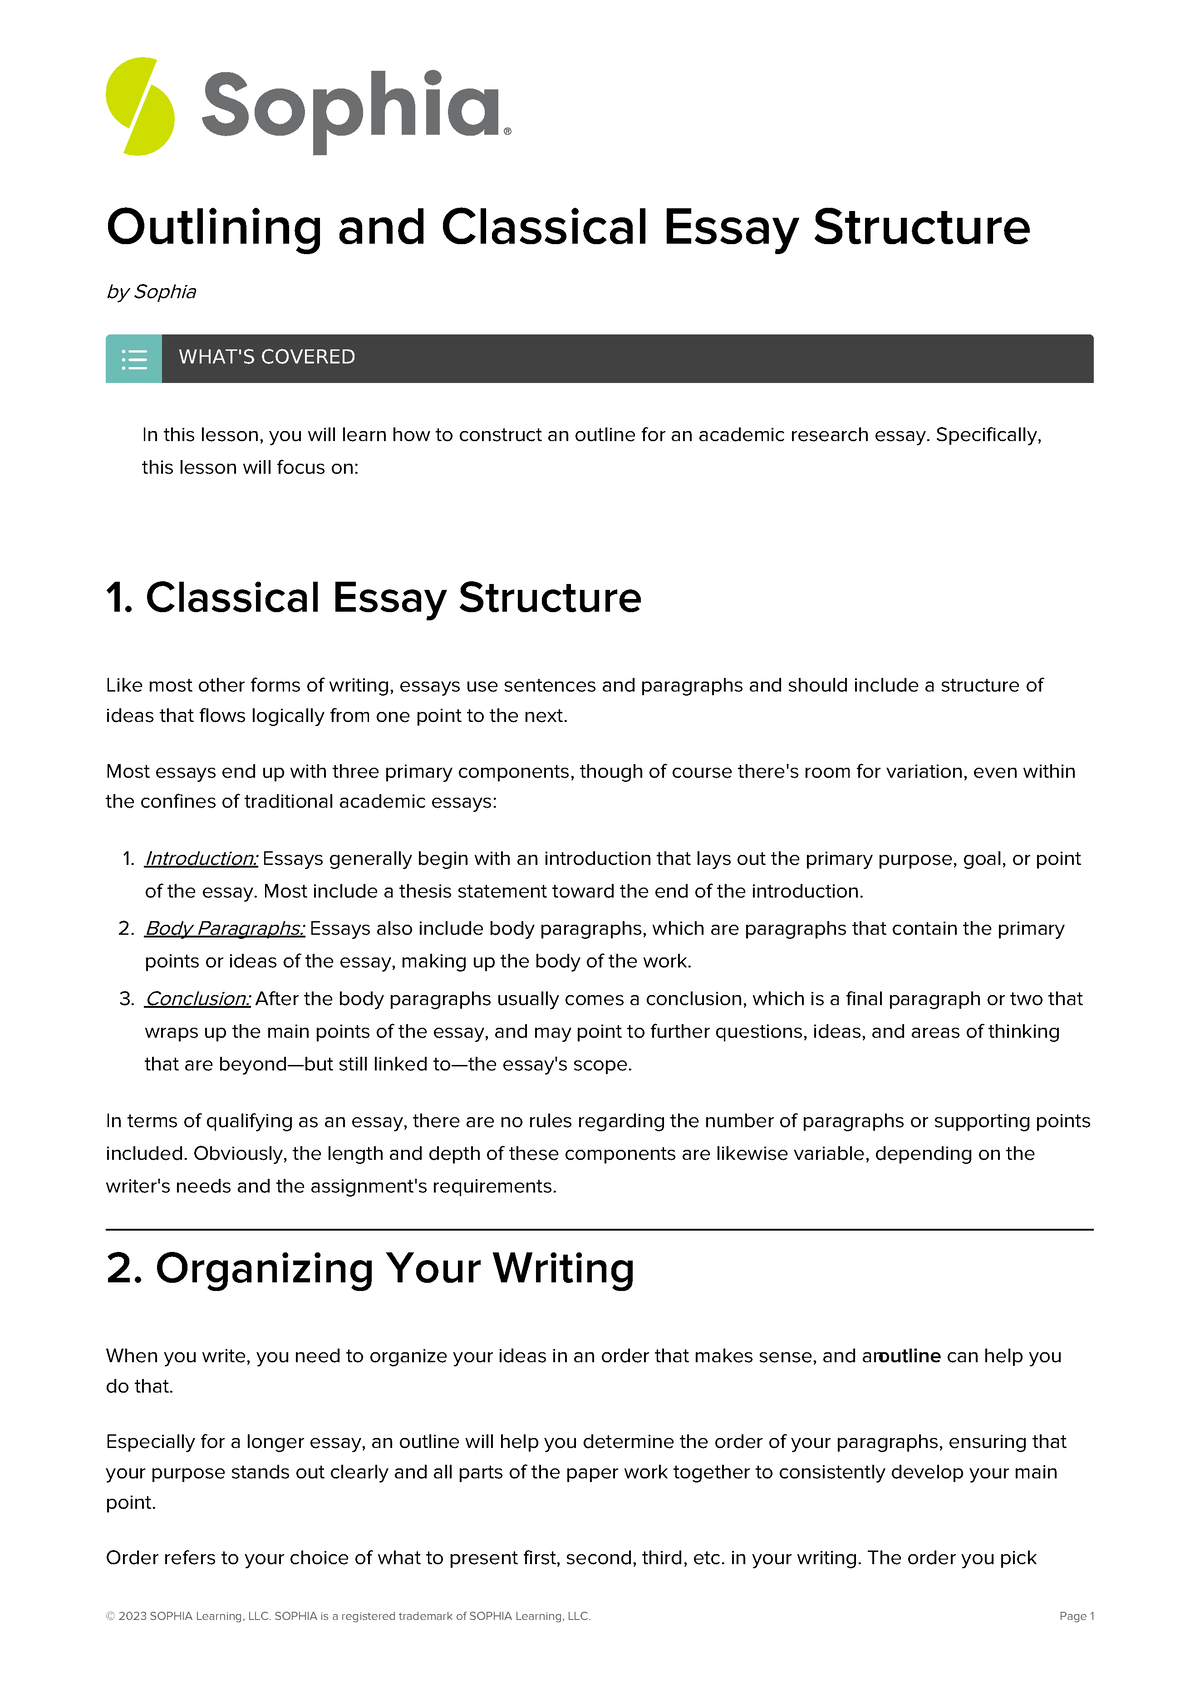 classical theory example essay